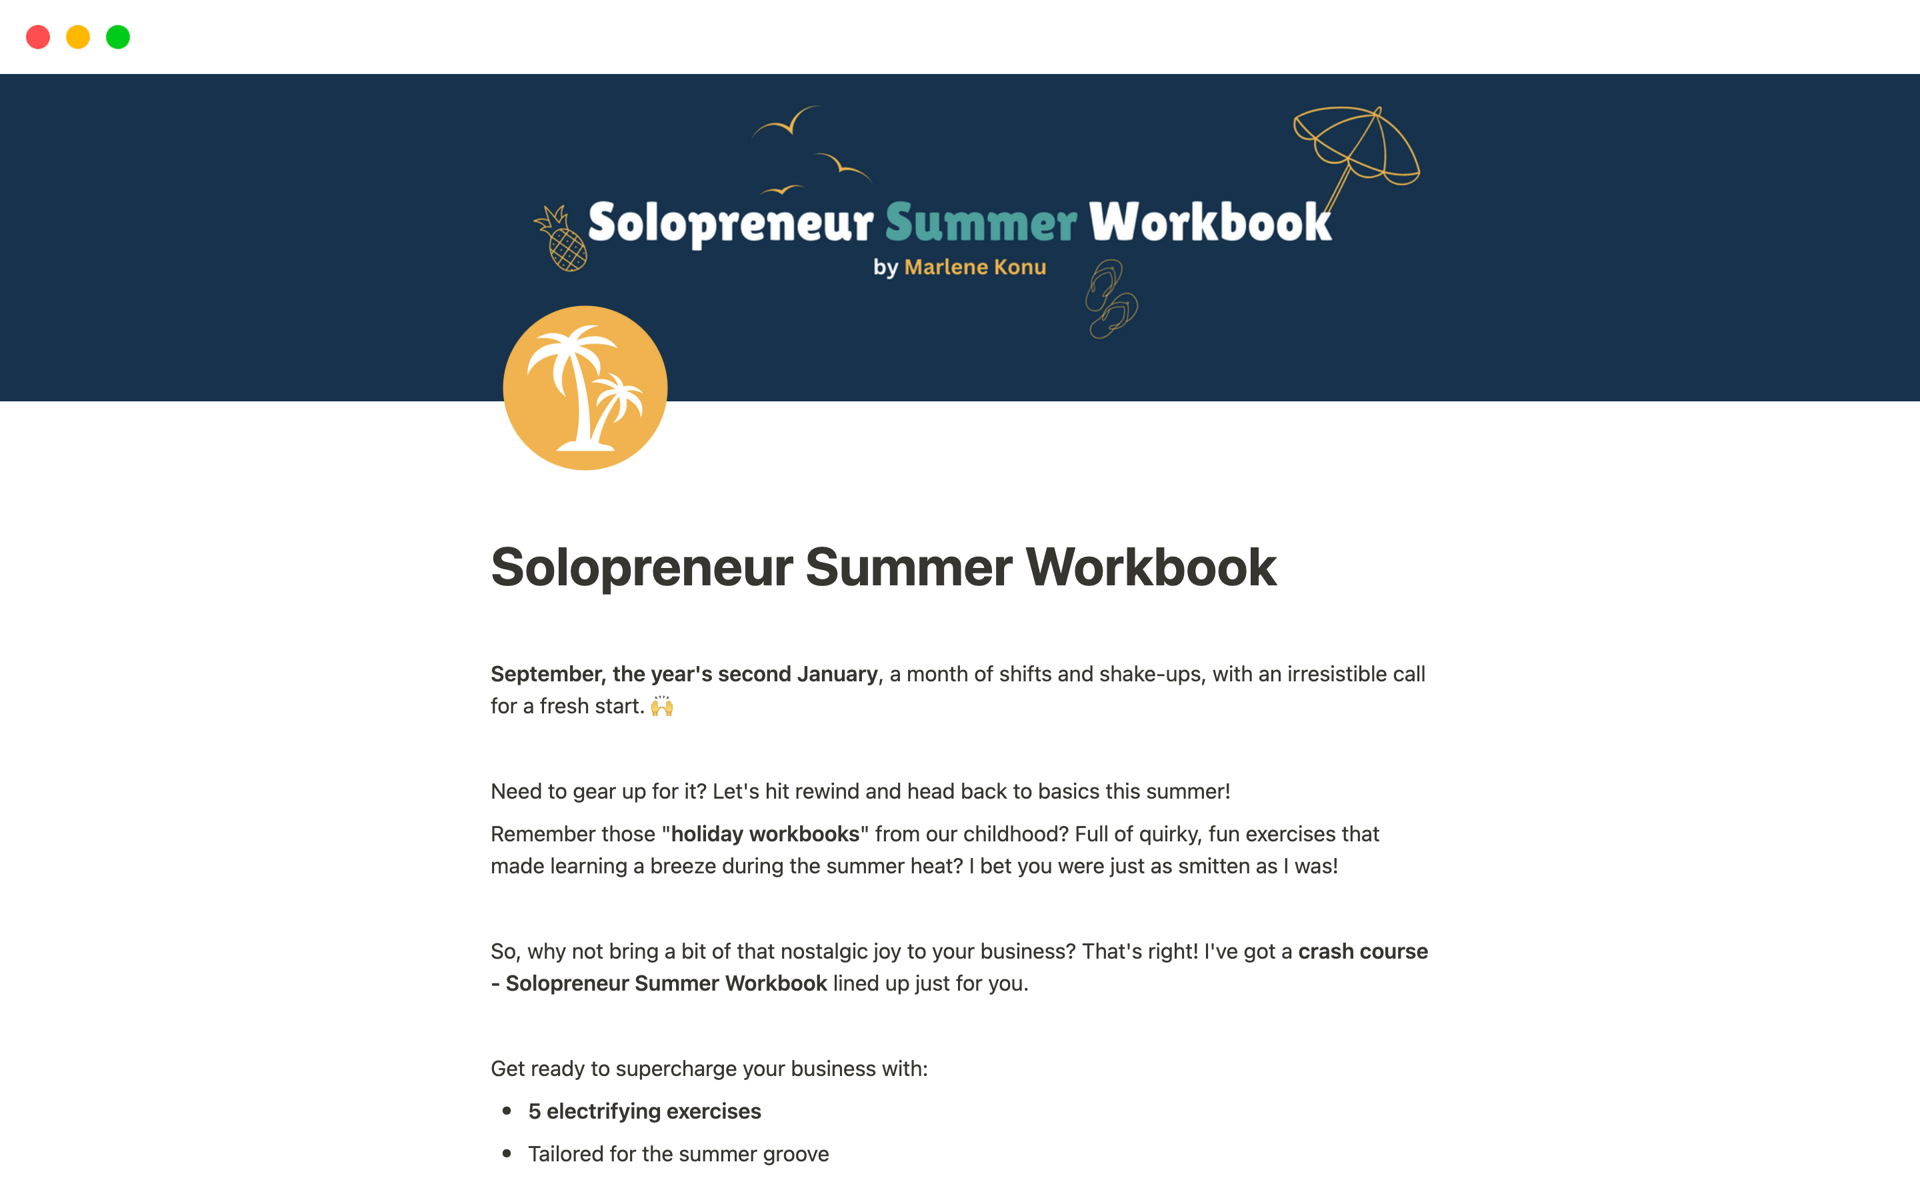 The Solopreneur Summer Workbook unlocks your business potential and watch it soar.